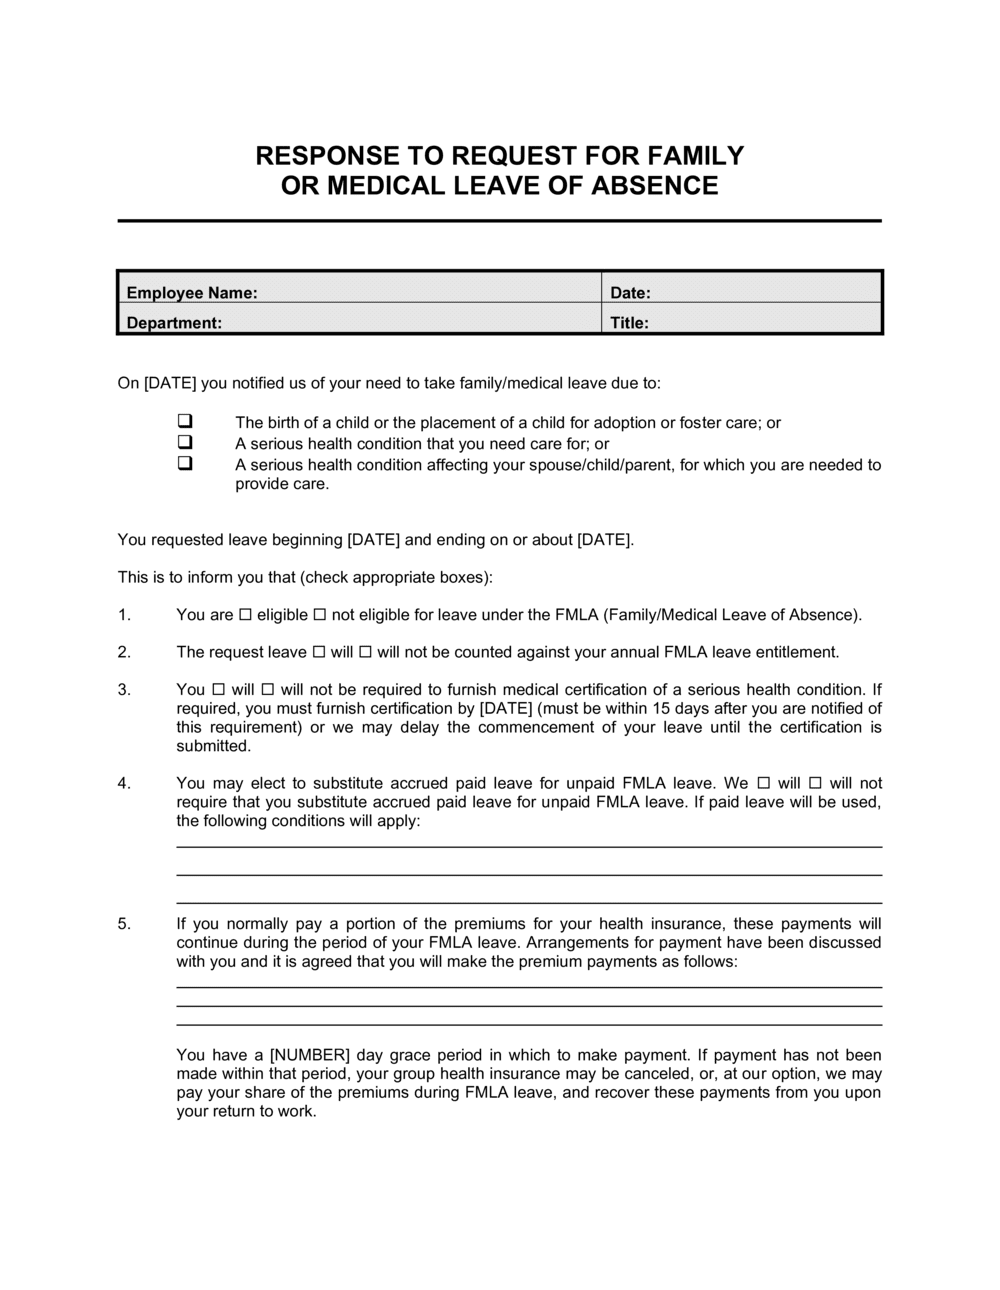 Sample Letter For Leave Of Absence From Work Due To Illness from templates.business-in-a-box.com